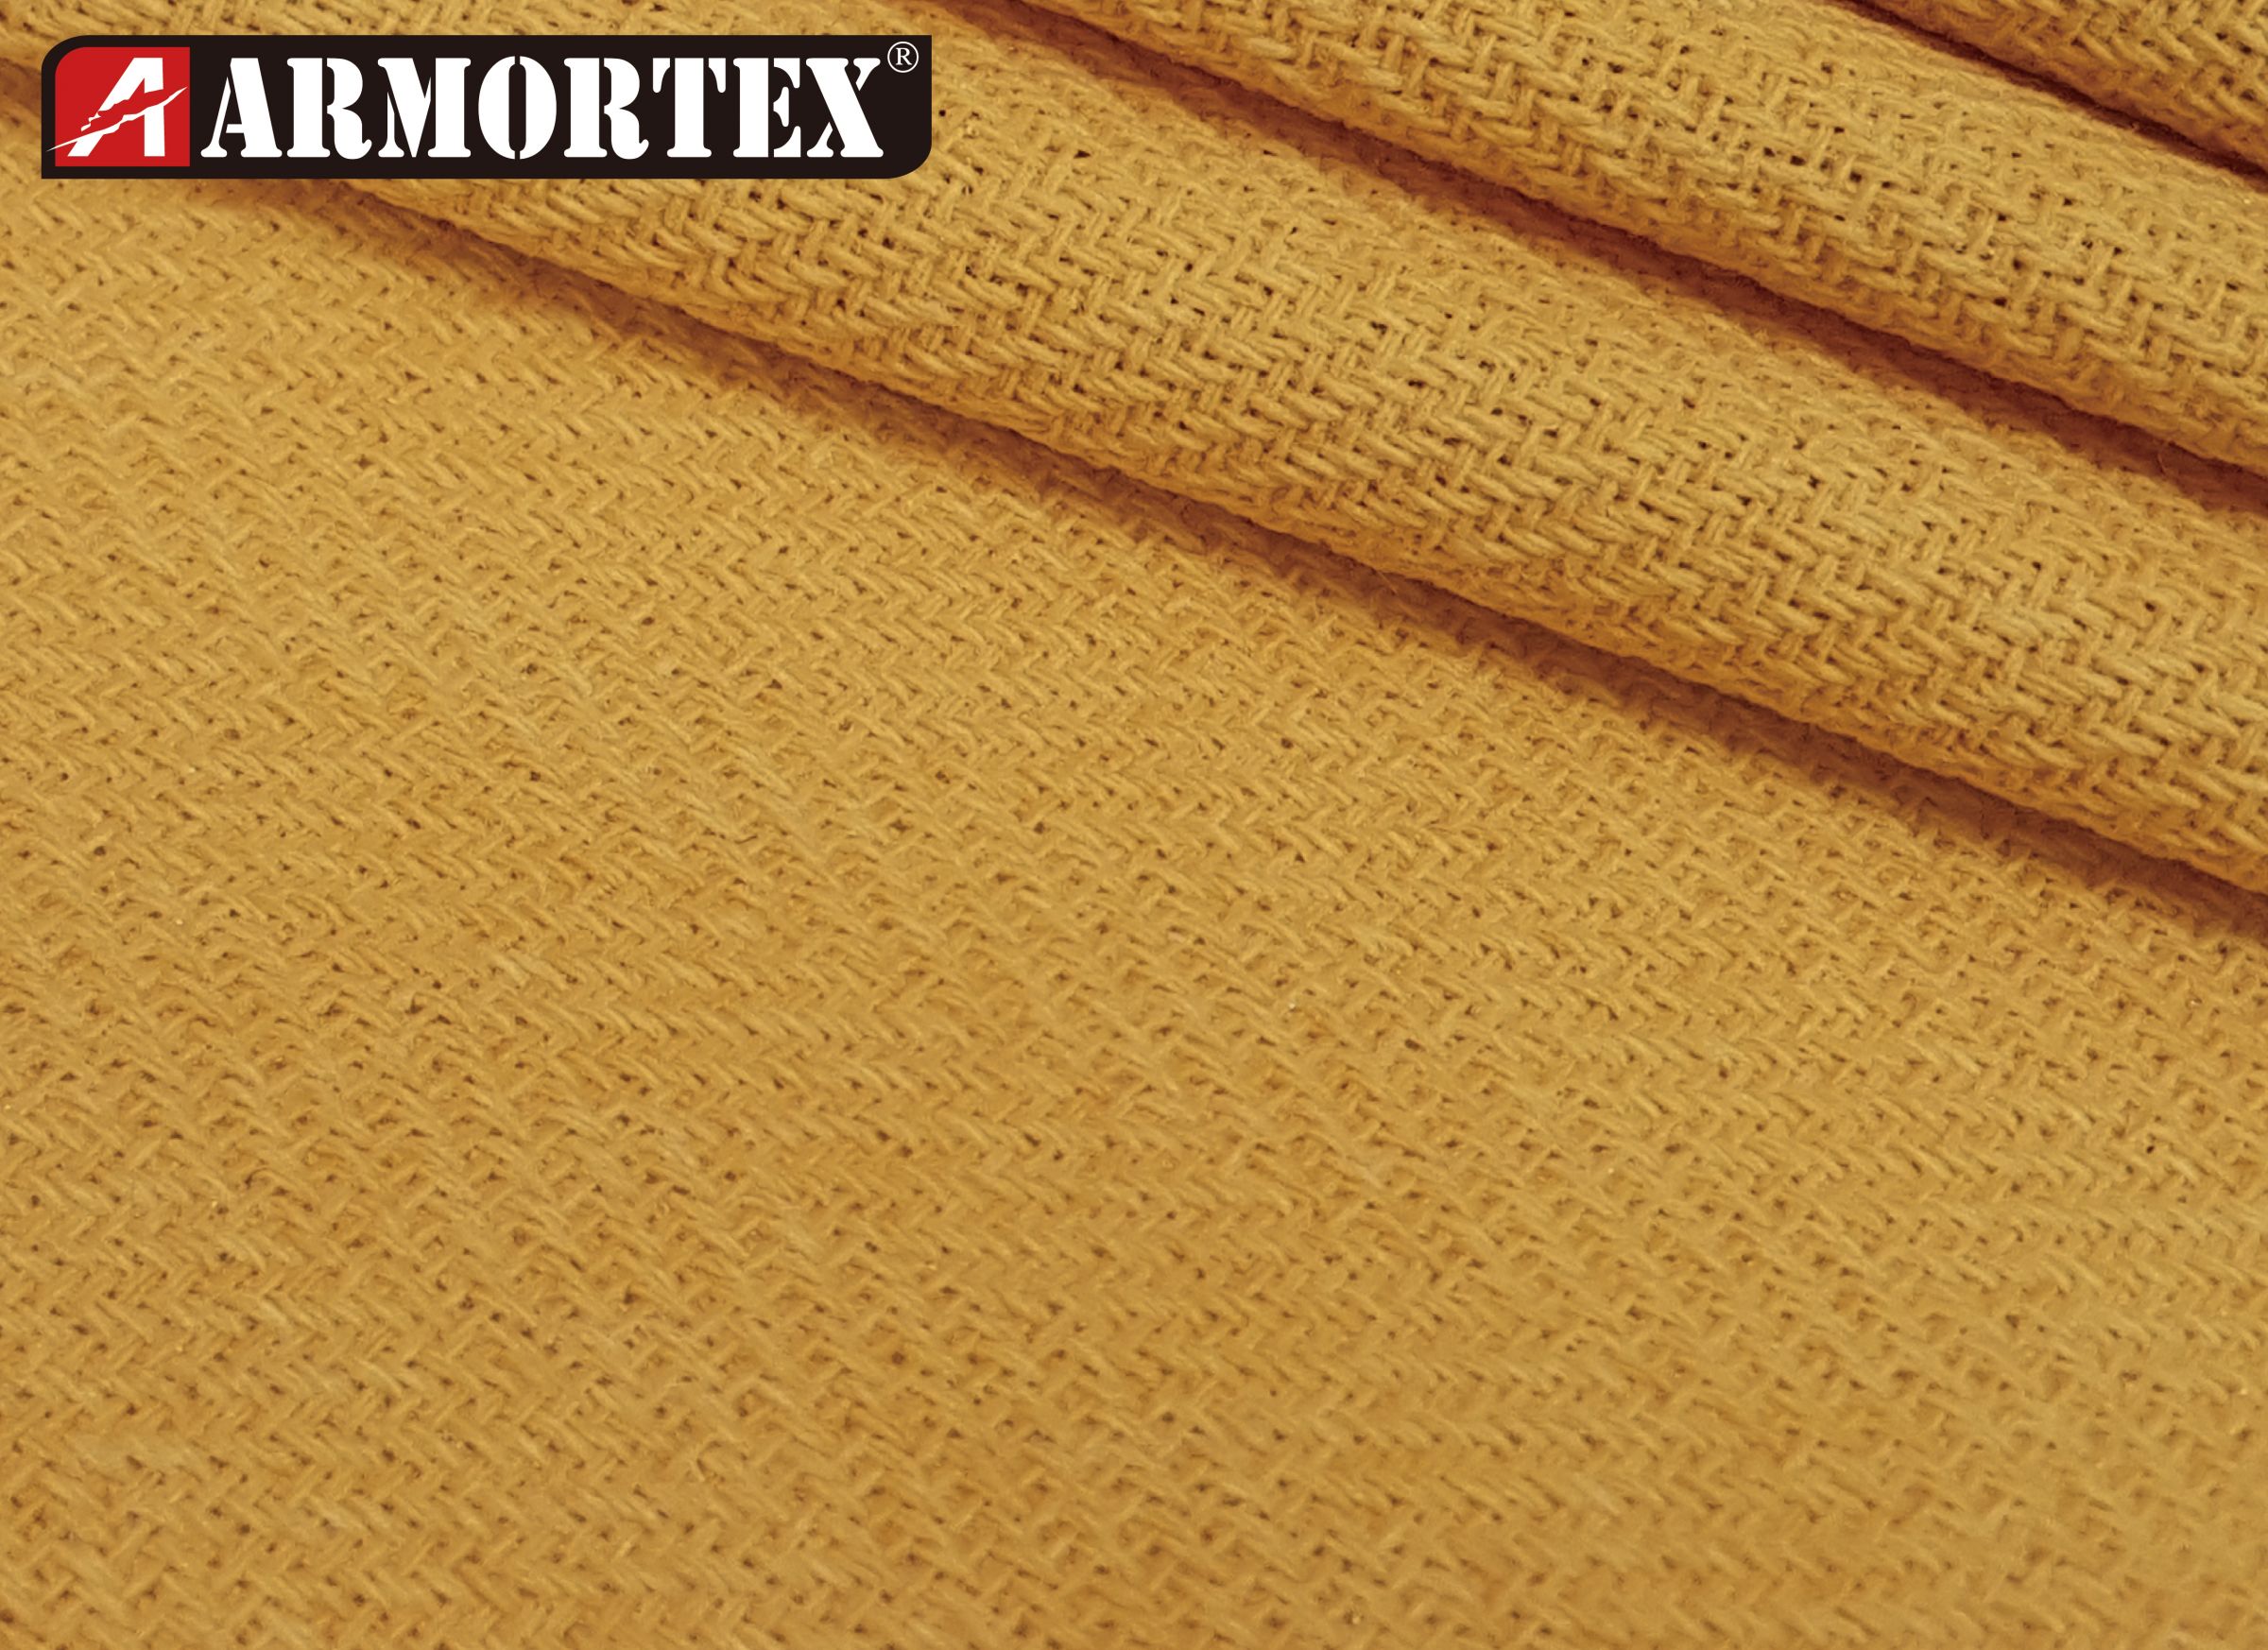 Stretchable Abrasion Resistant Color Coated Fabric Made with Kevlar® -  Kevlar® Abrasion Resistant Fabric, Made in Taiwan Textile Fabric  Manufacturer with ESG Reports